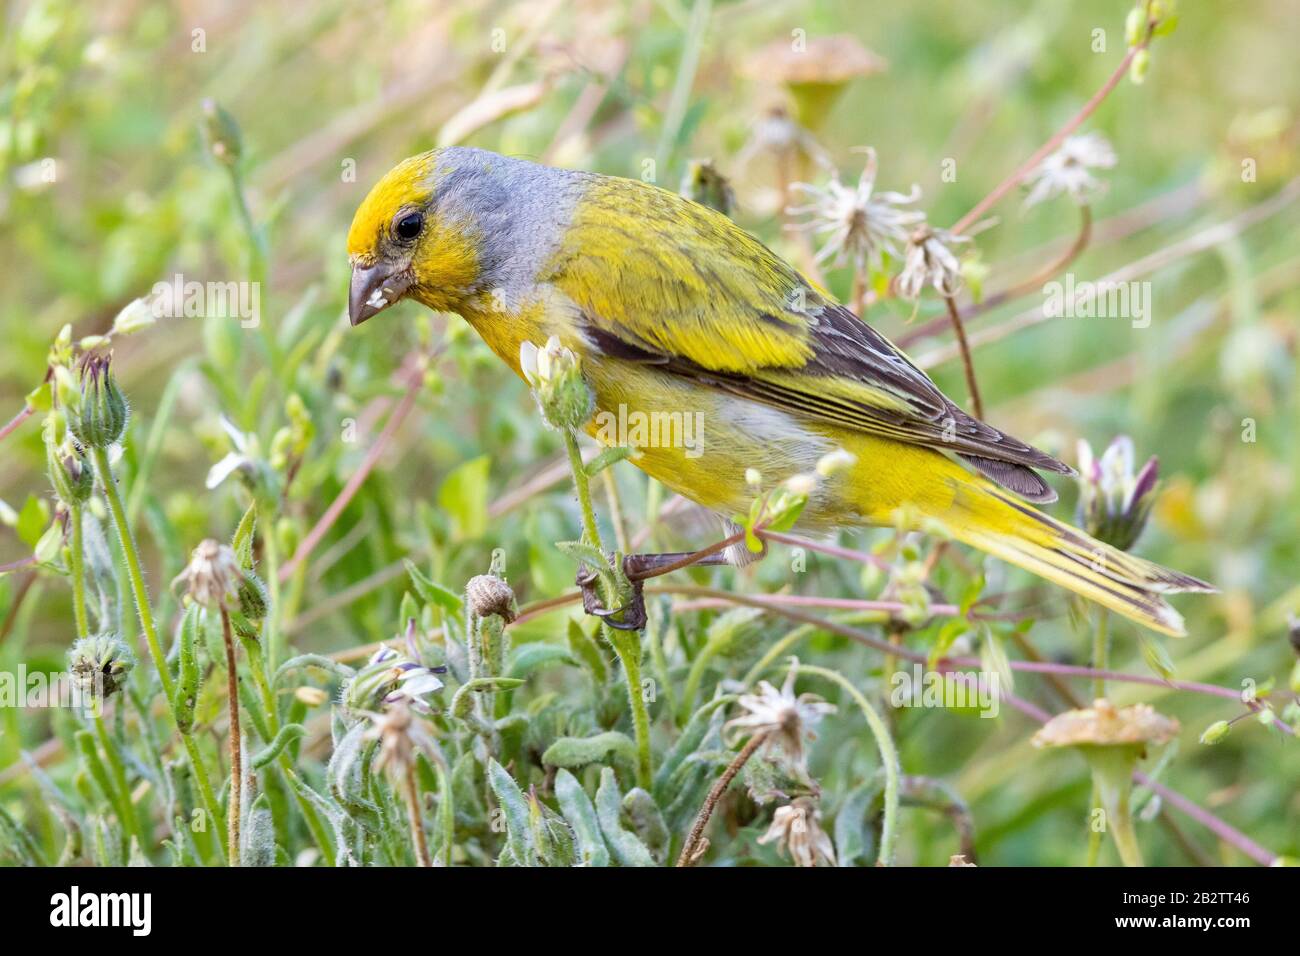 Cape Canary (Serinus canicollis), adult male feeding among the grass, Western Cape, South Africa Stock Photo